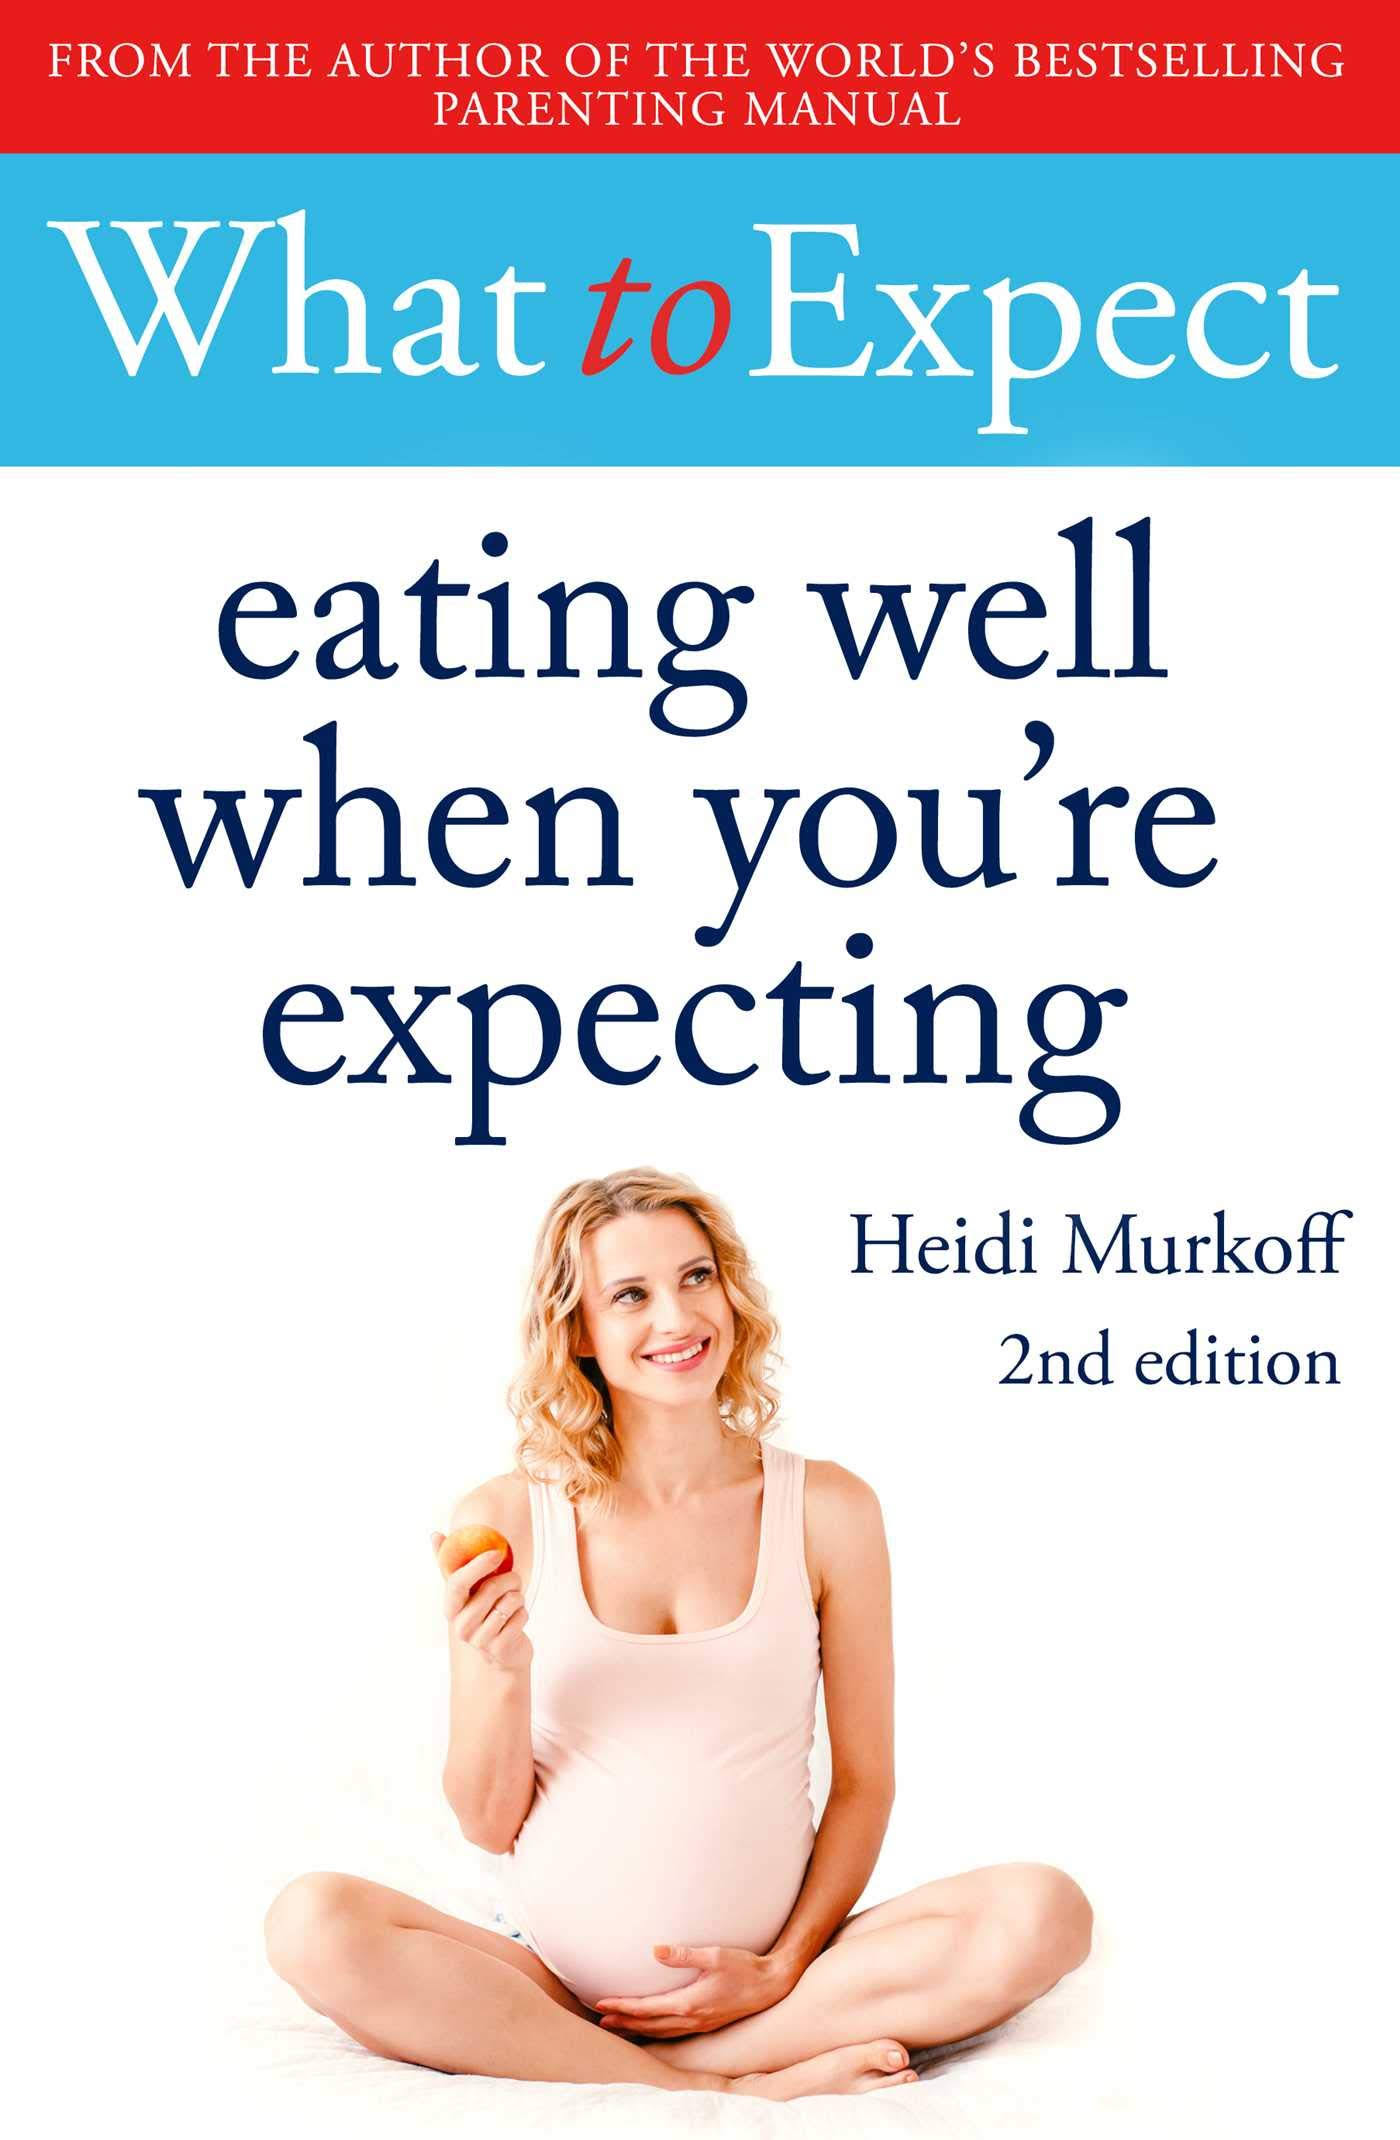 What to Expect: Eating Well When You're Expecting 2nd Edition [Book]